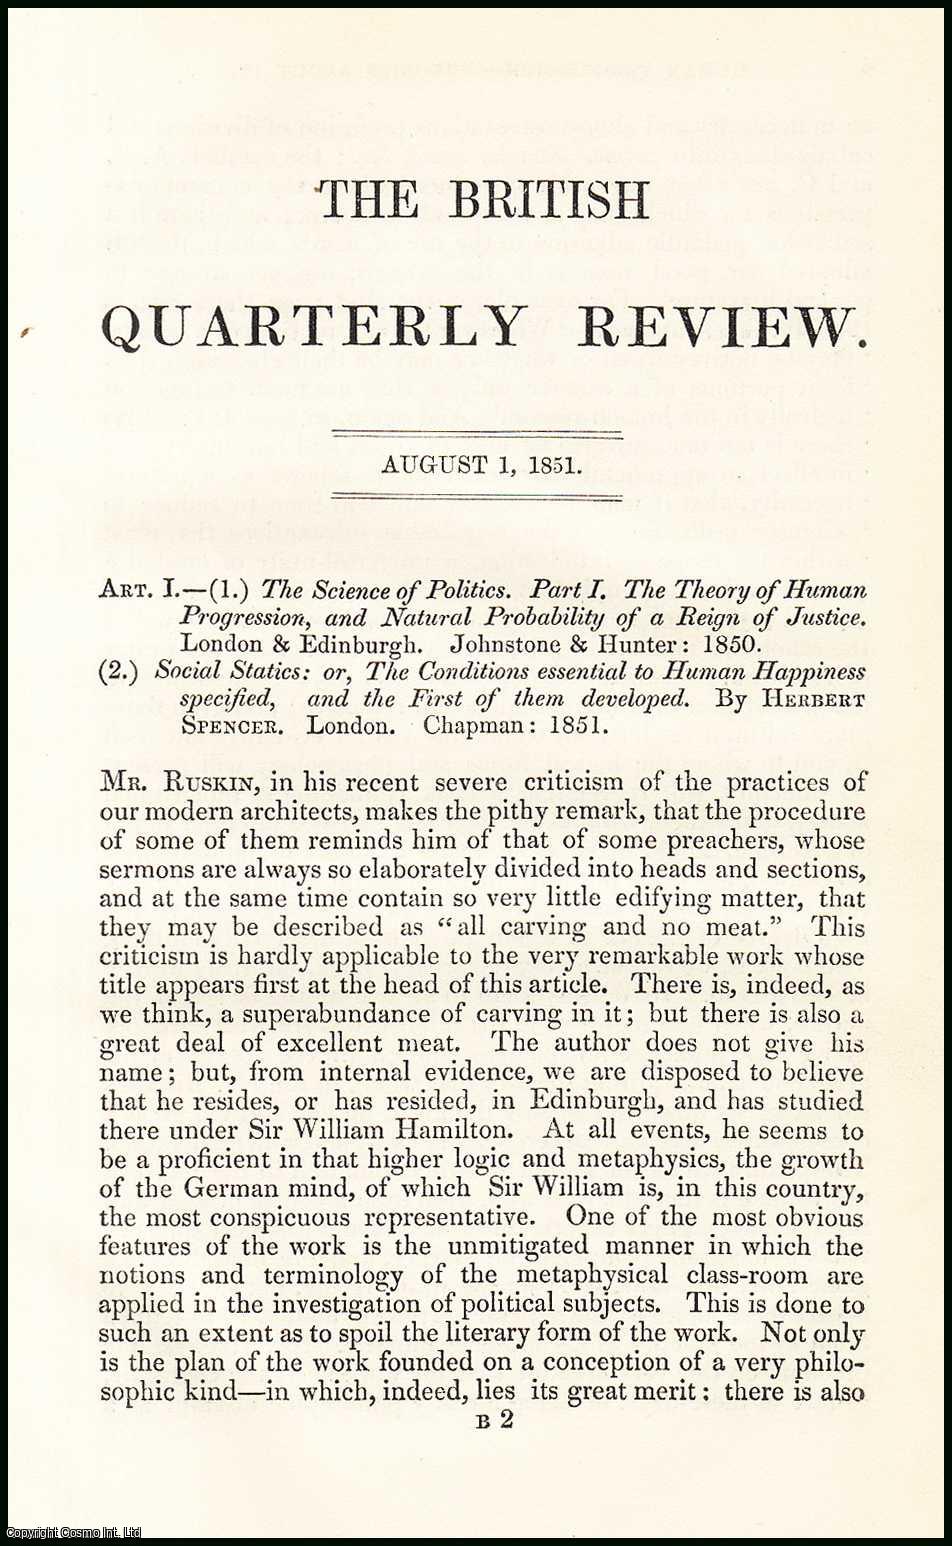 Author Unknown - Human Progression - theories about it. A rare original article from the British Quarterly Review, 1851.